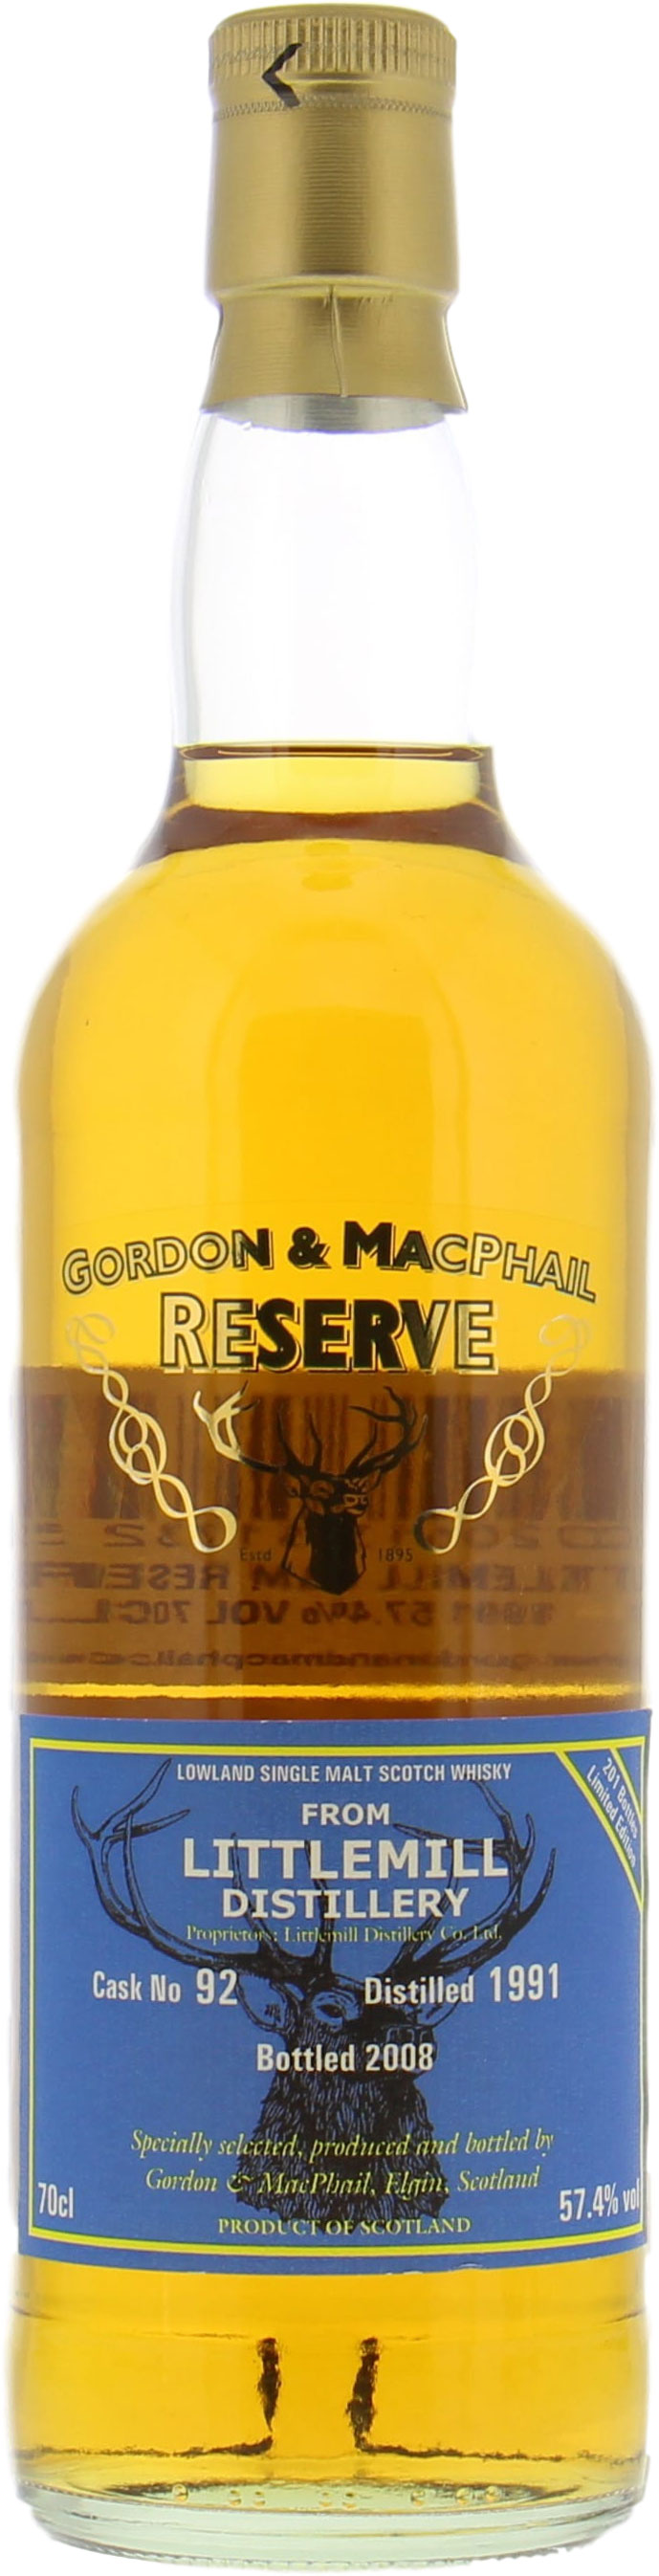 Littlemill - 17 Years Old Gordon & MacPhail Reserve Cask:92 57.4% 1991 NO OC INCLUDED!